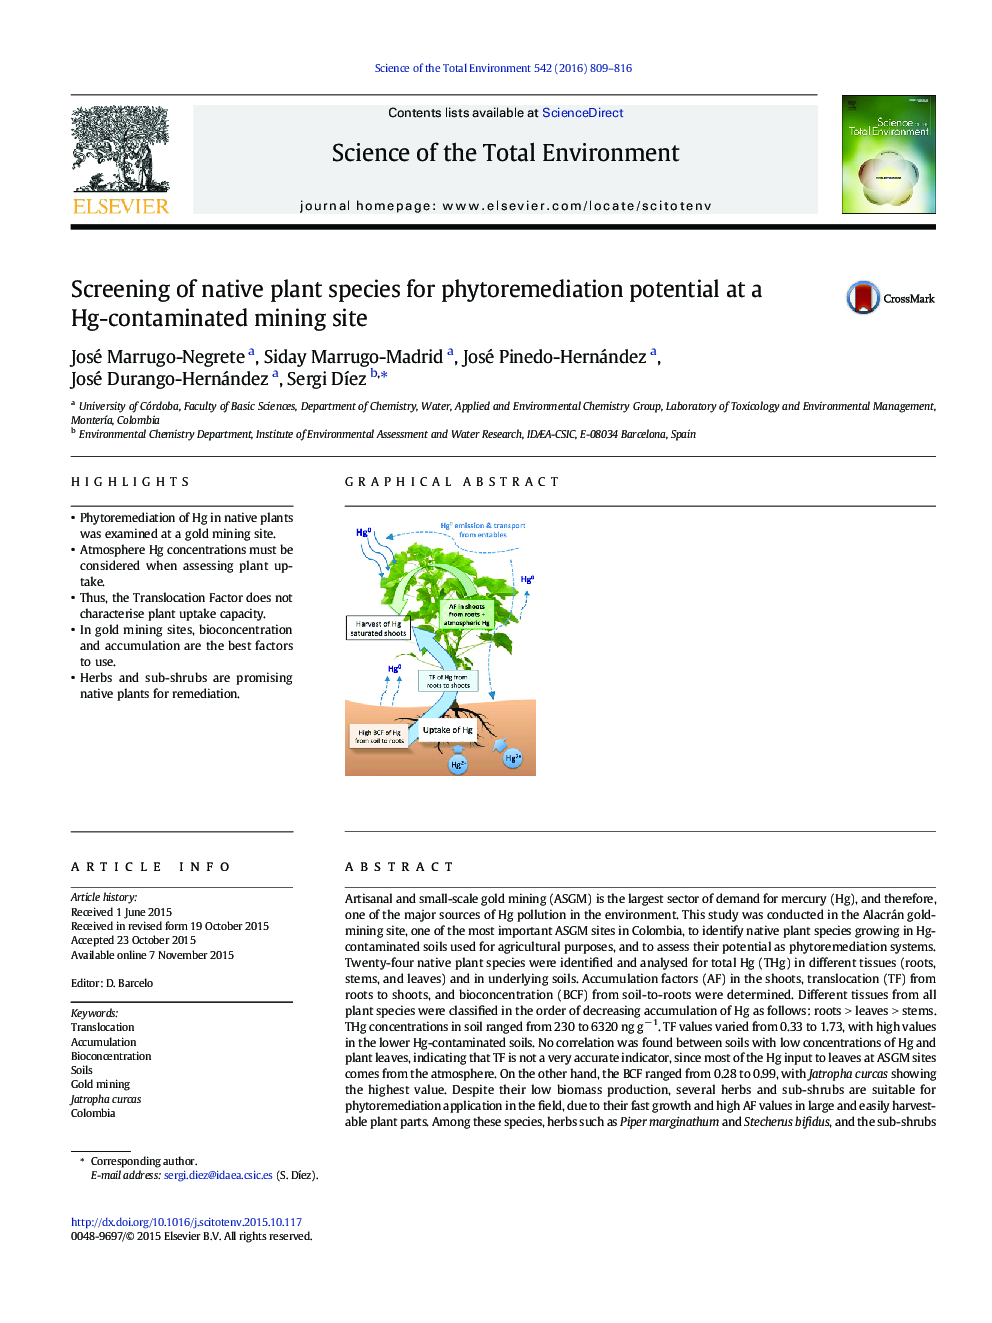 Screening of native plant species for phytoremediation potential at a Hg-contaminated mining site